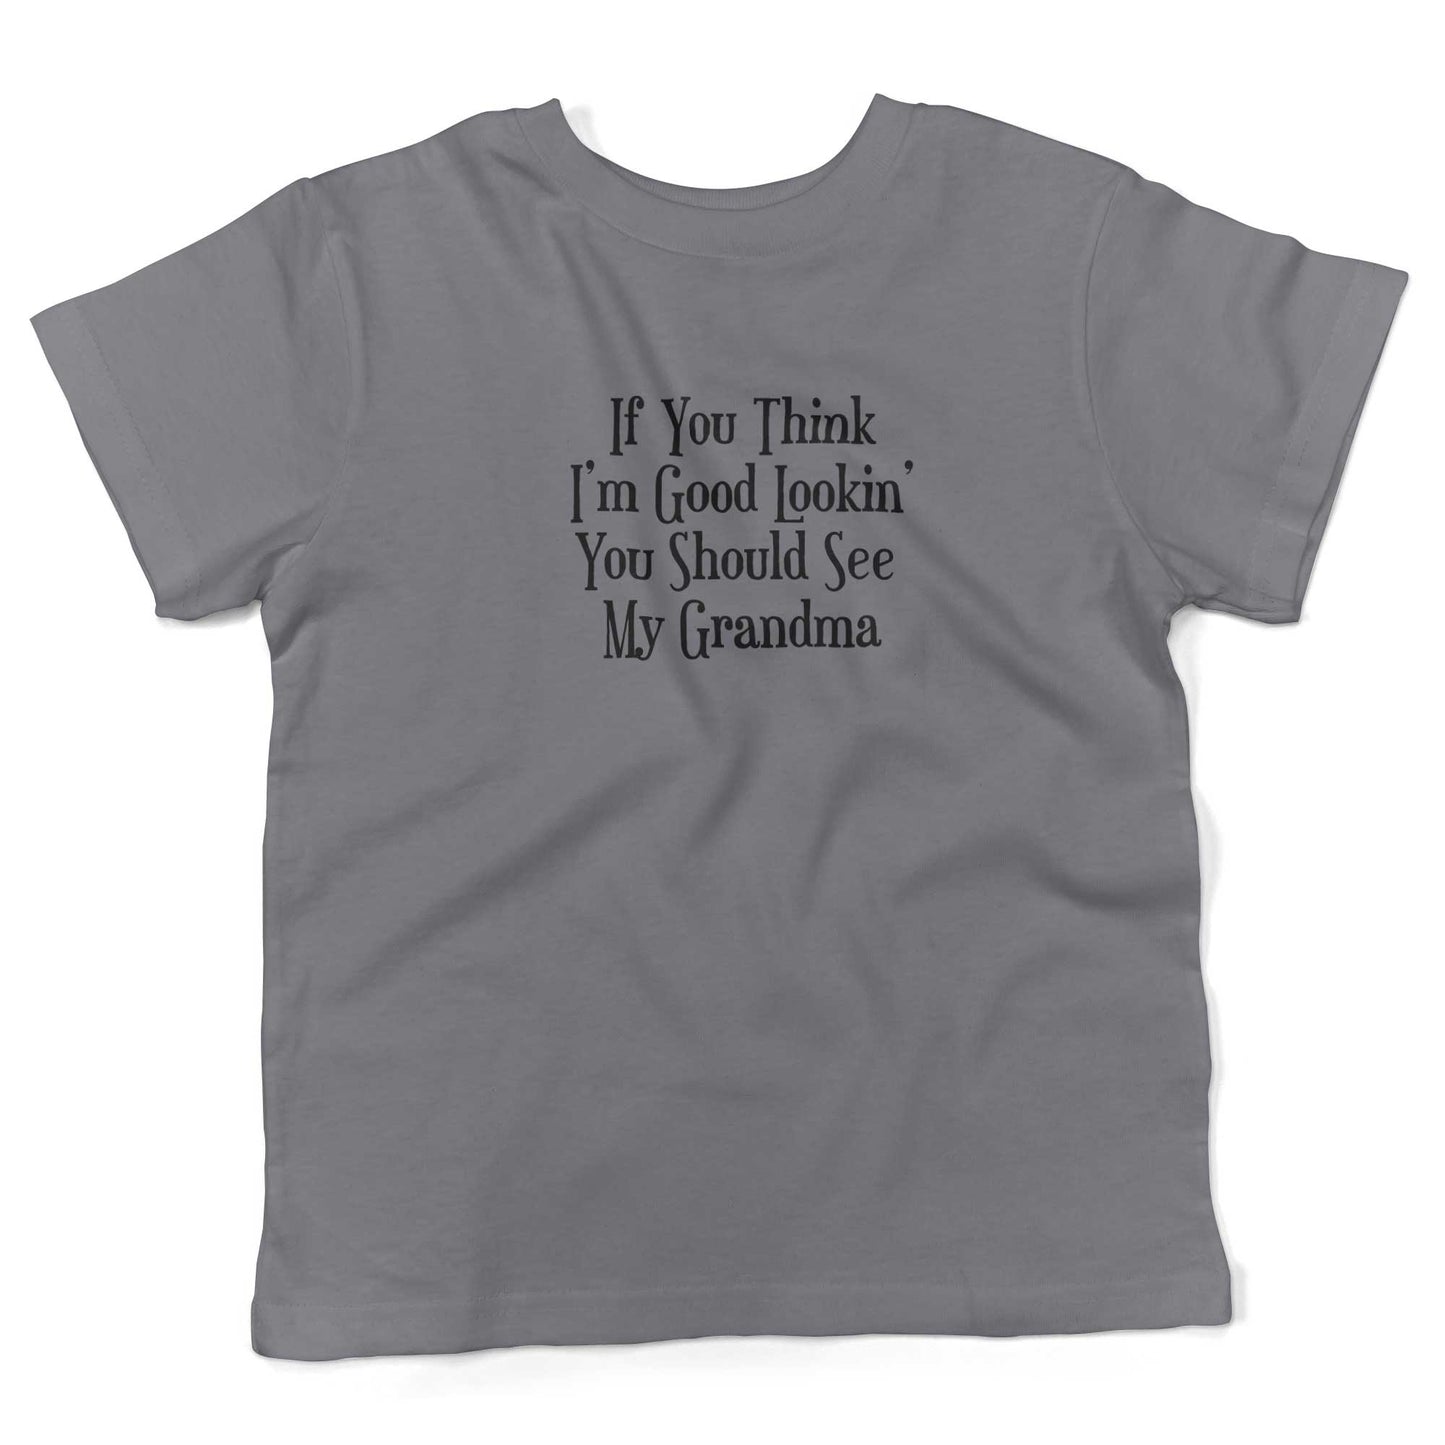 If You Think I'm Good Lookin', You Should See My Grandma Toddler Shirt-Slate-2T